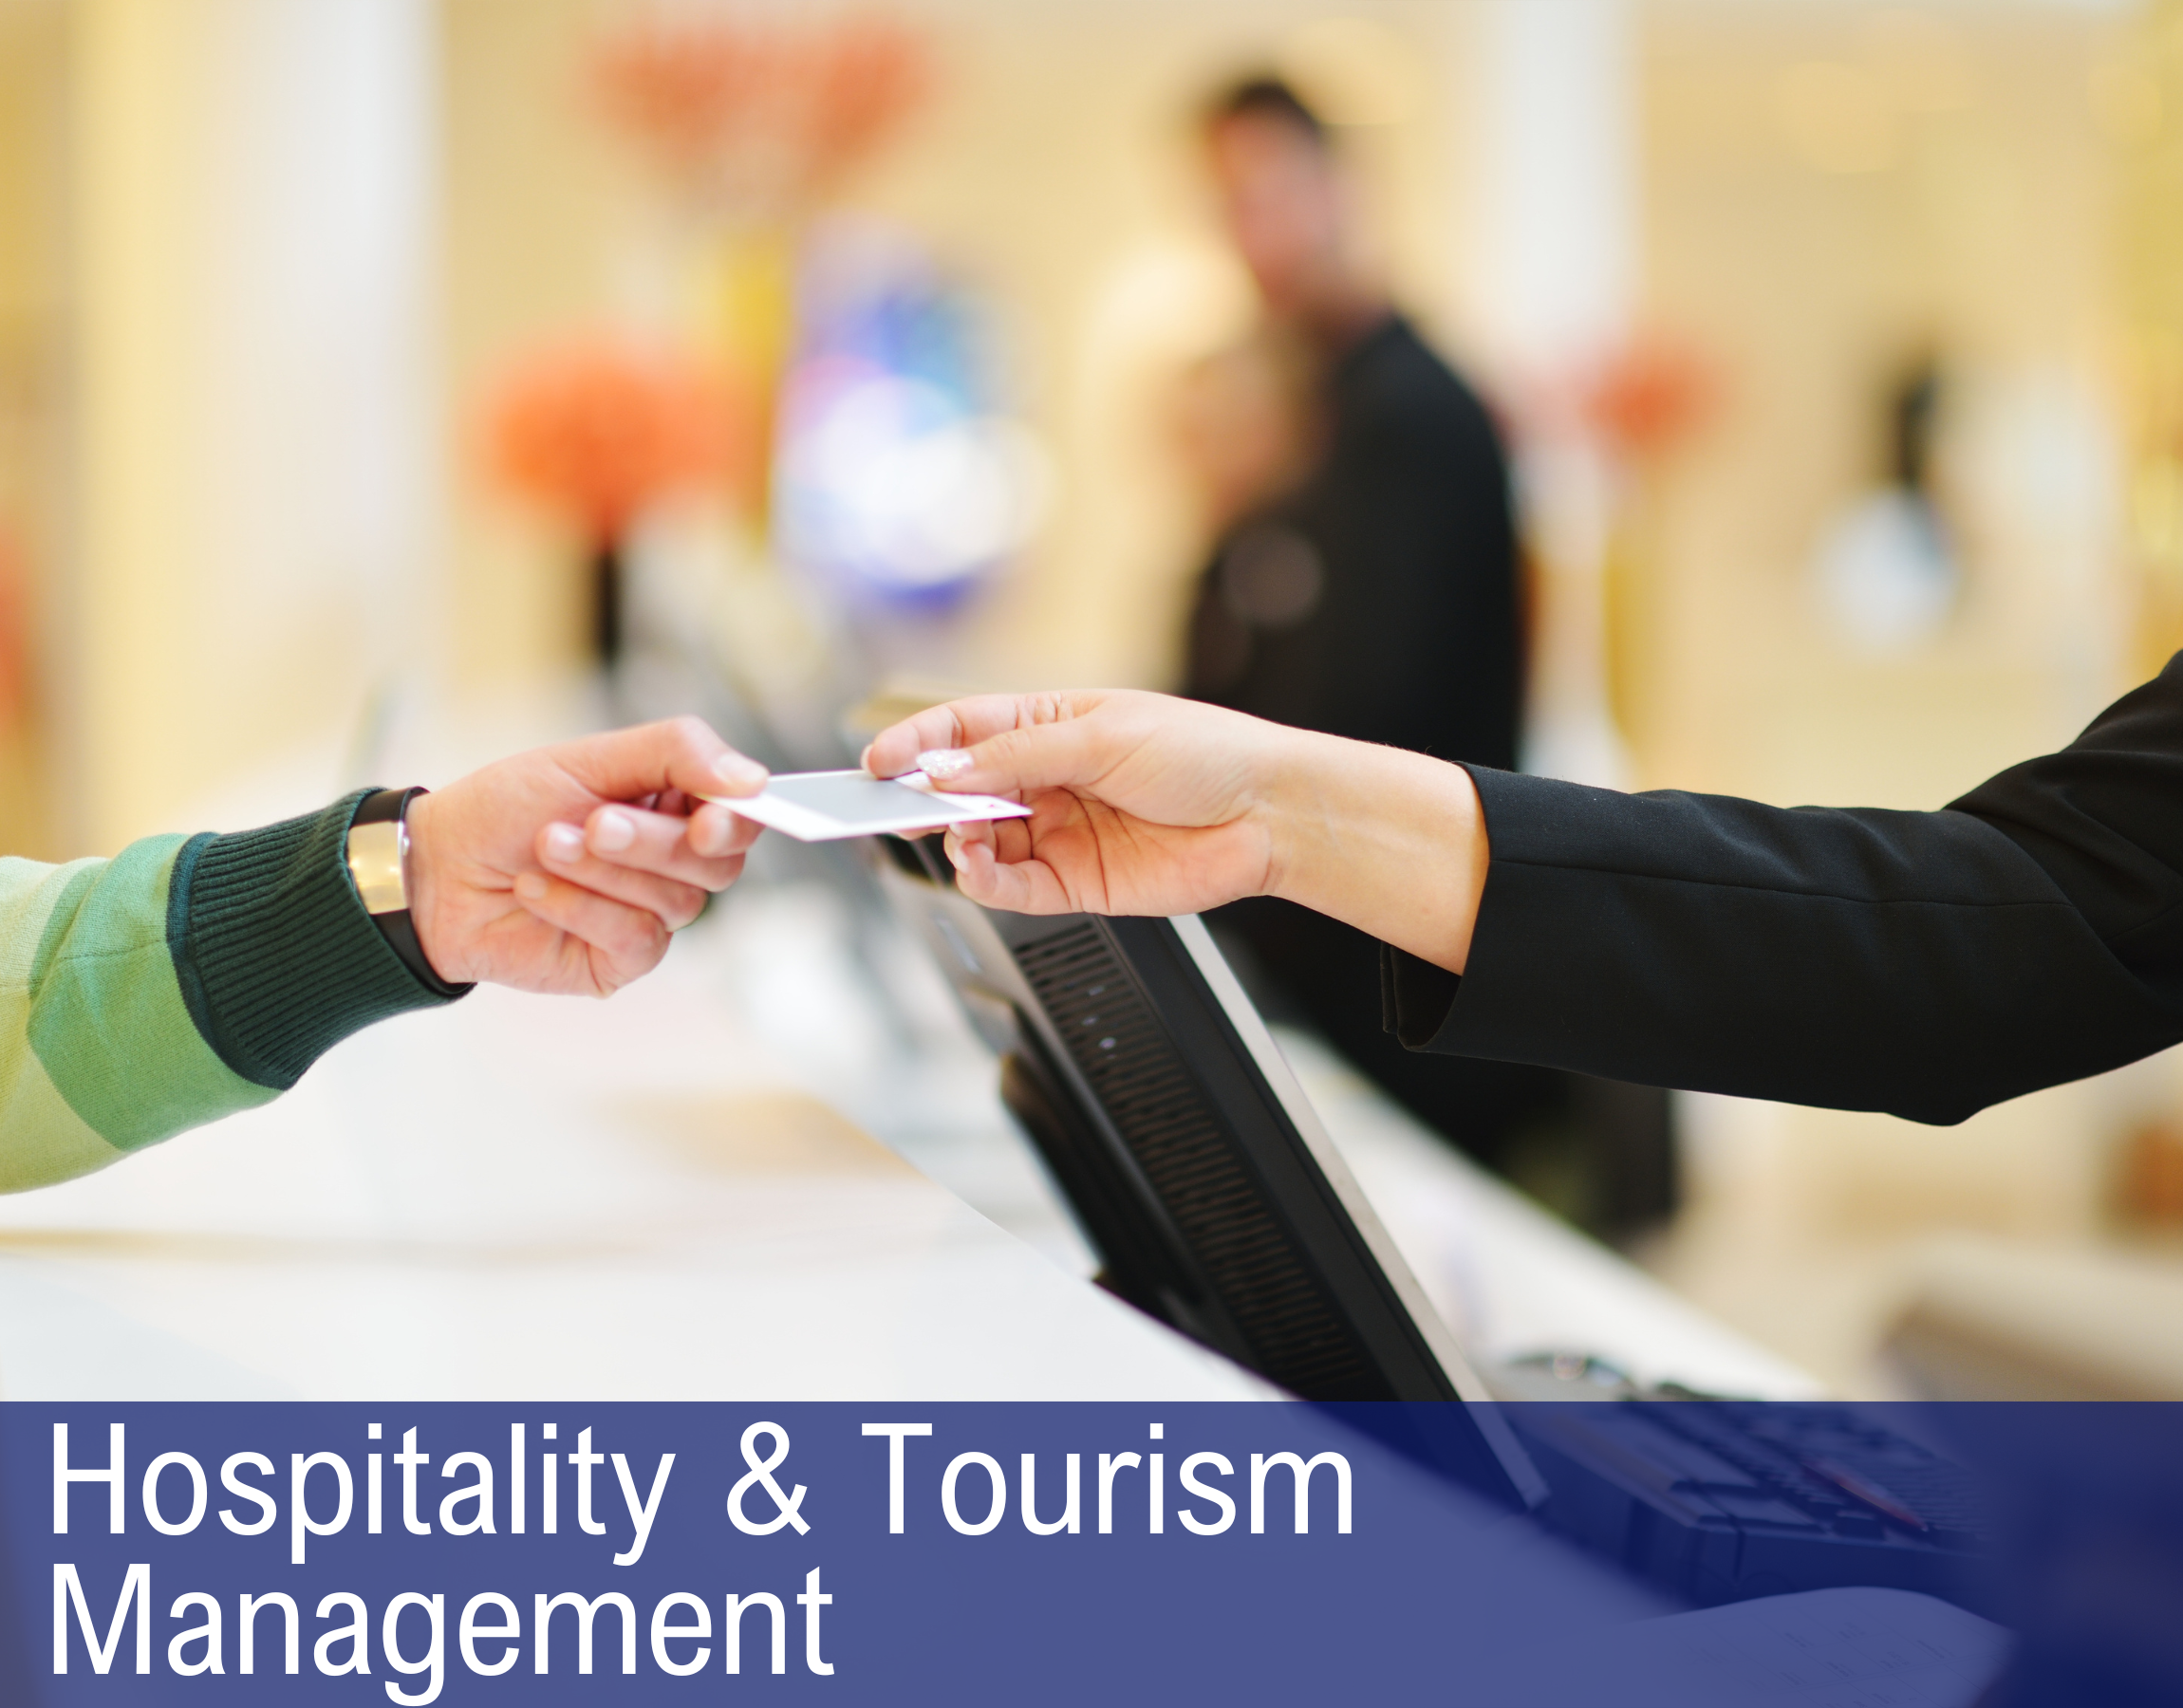 HOSPITALITY AND TOURISM MANAGEMENT